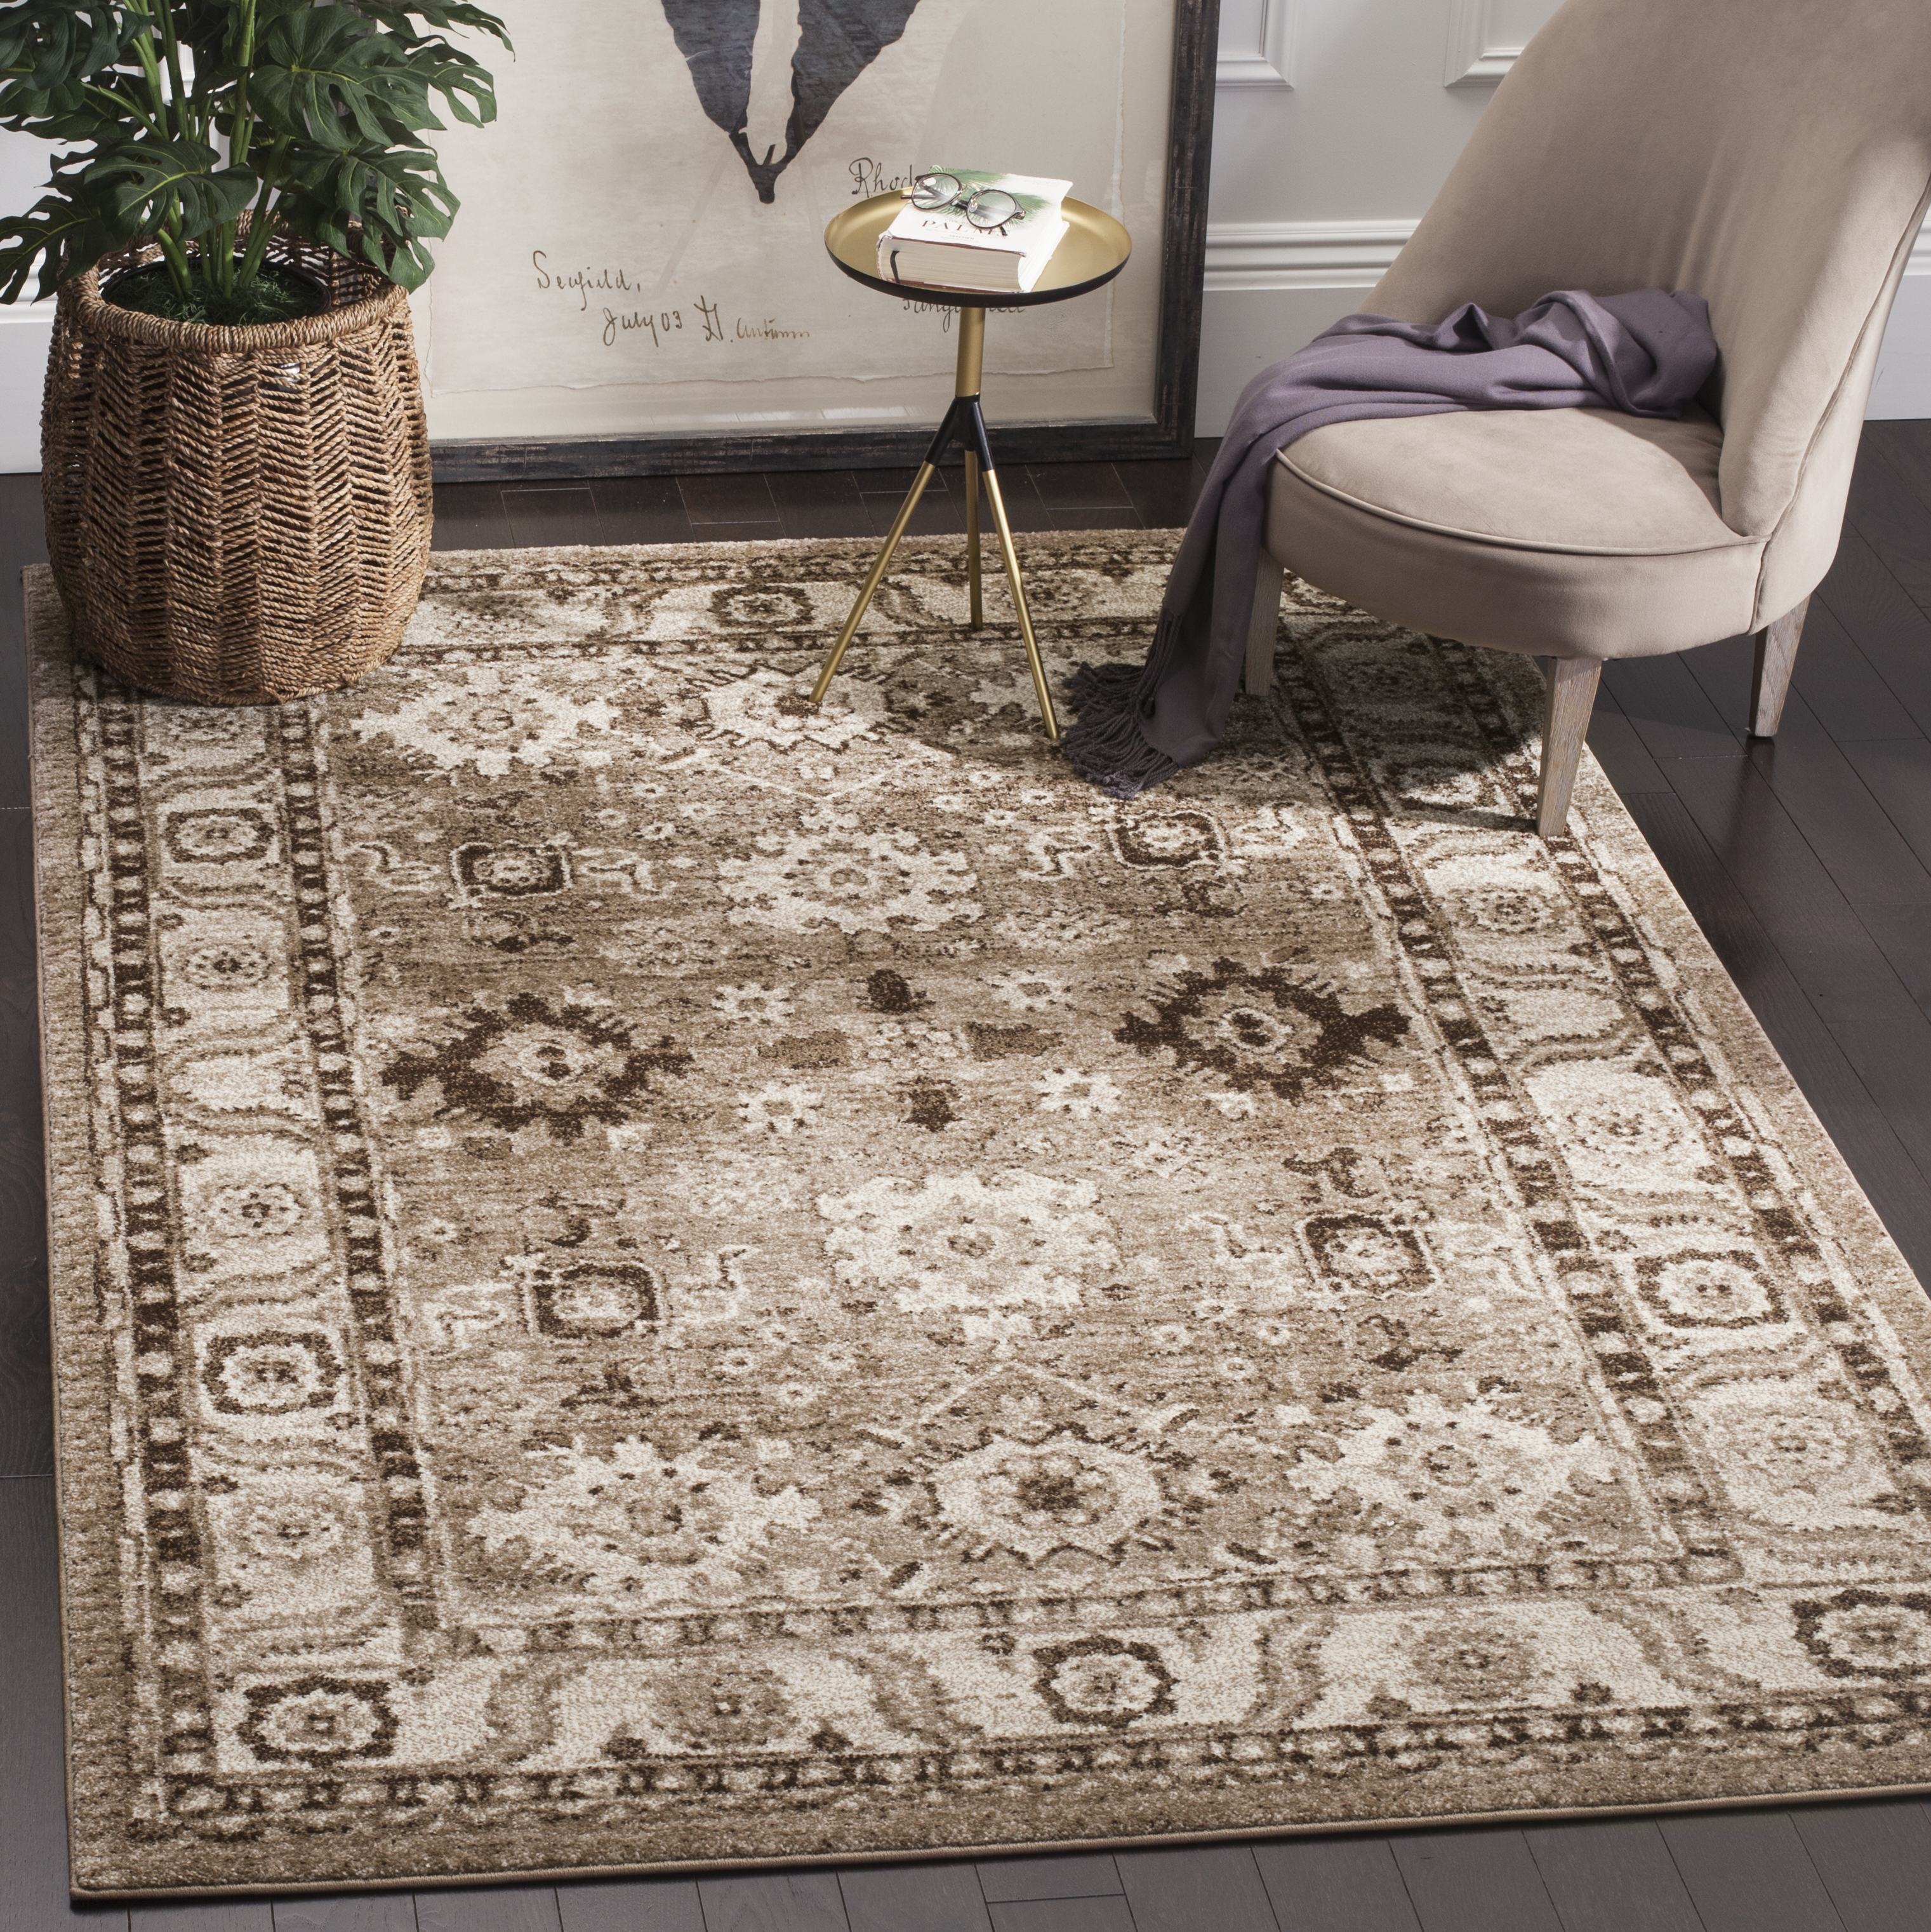 Arlo Home Woven Area Rug, VTH214T, Taupe,  5' 3" X 7' 6" - Image 1